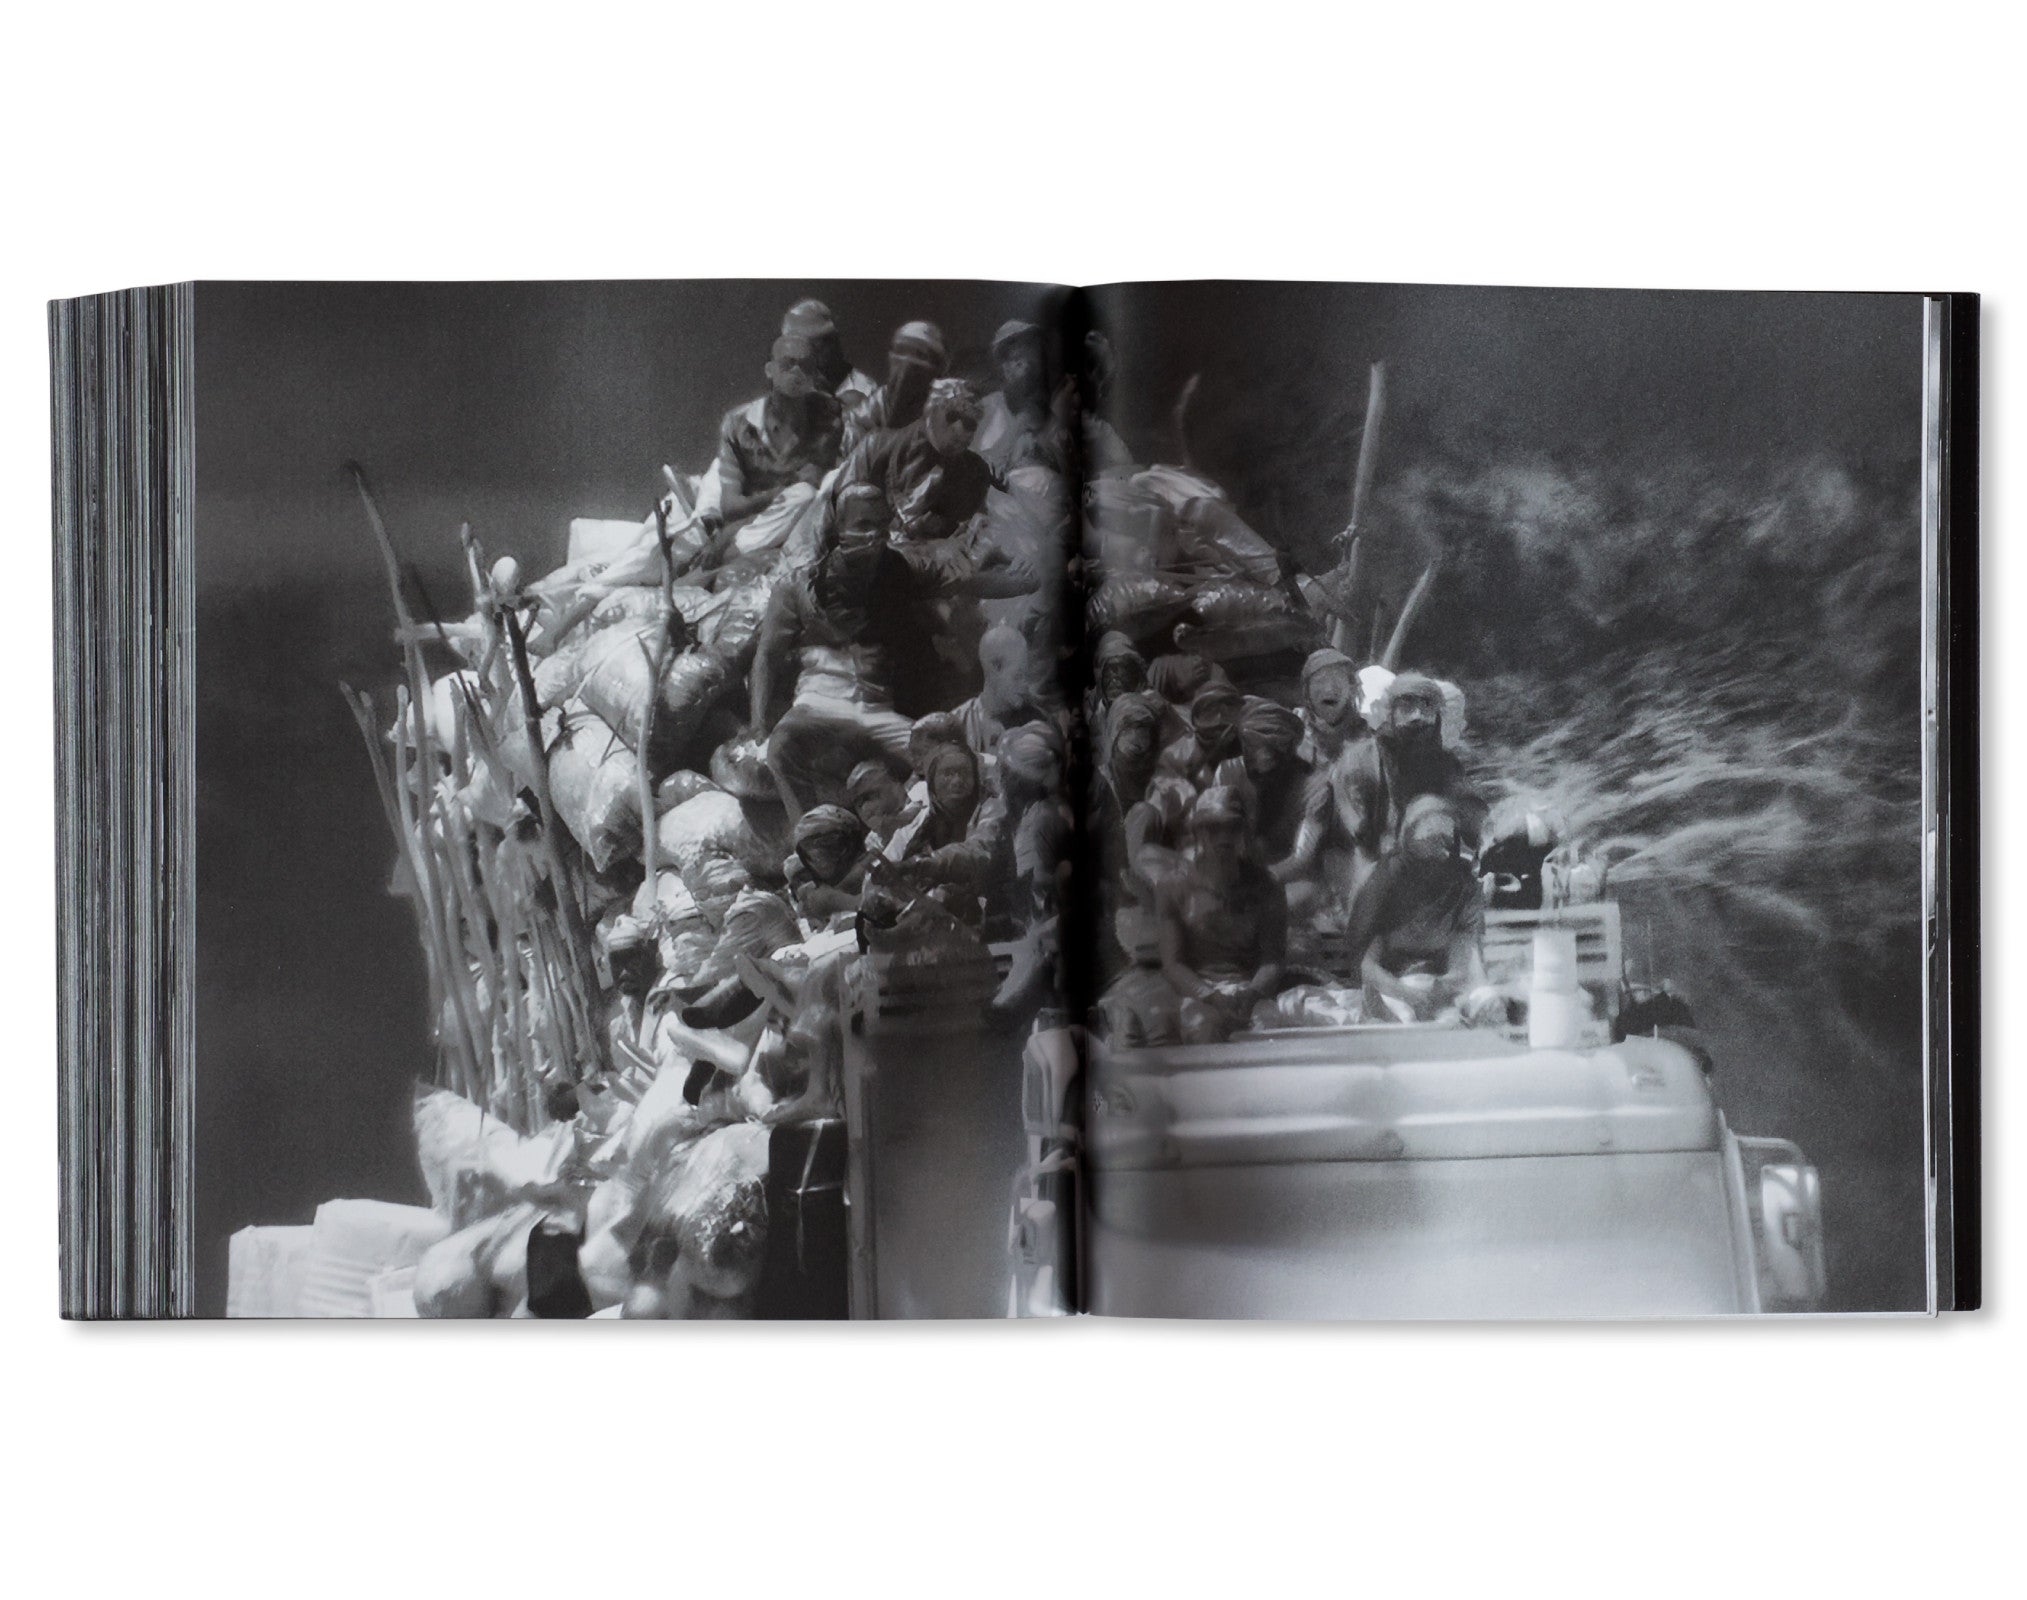 INCOMING by Richard Mosse [SIGNED]